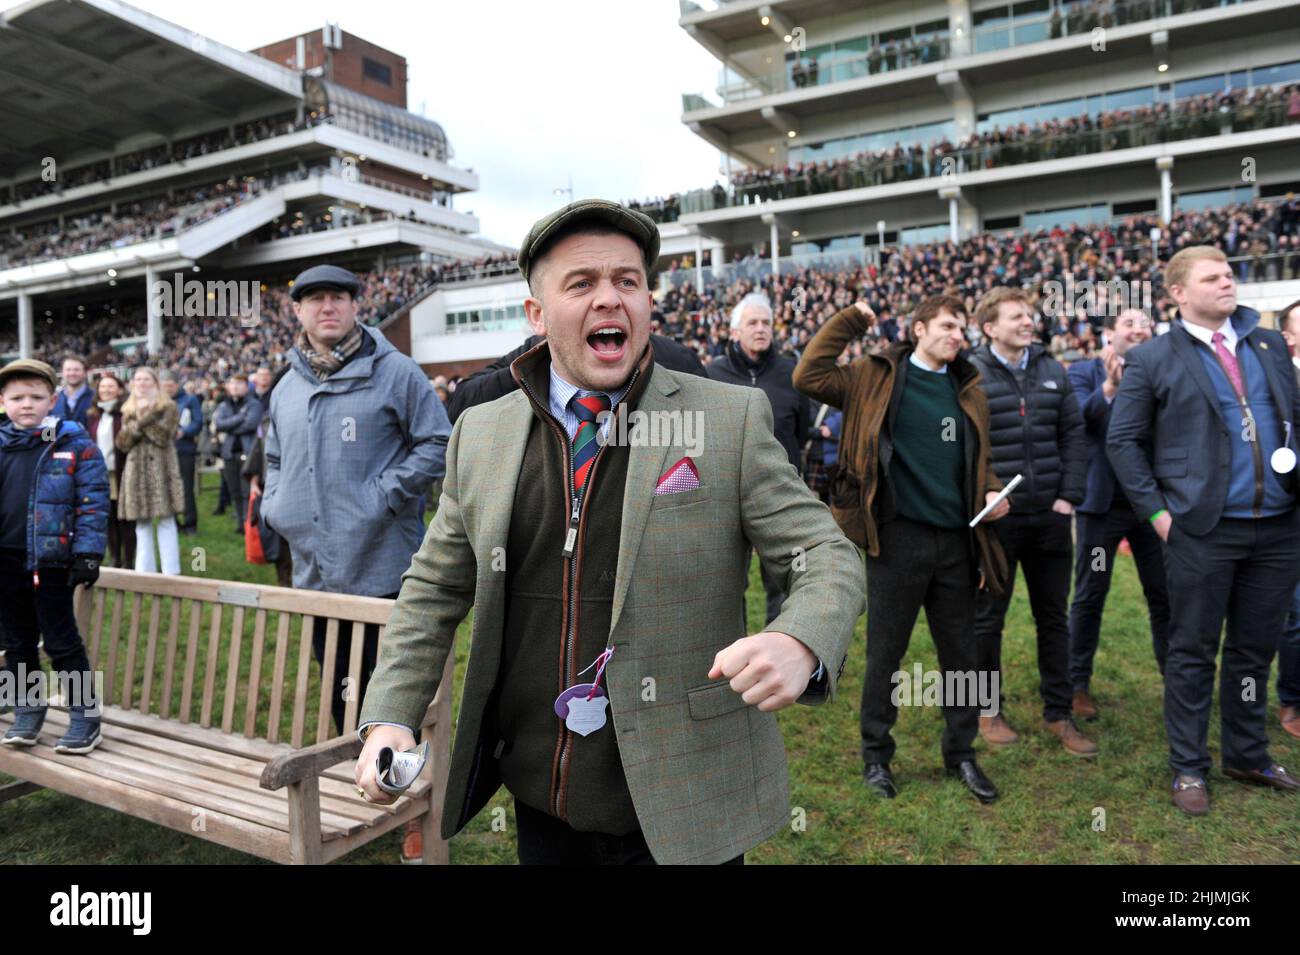 Racing at Cheltenham Racecourse, Prestbury Park on Festival Trials Day in January ahead of the Cheltenham Gold Cup Festival in March.   Crowds watchin Stock Photo